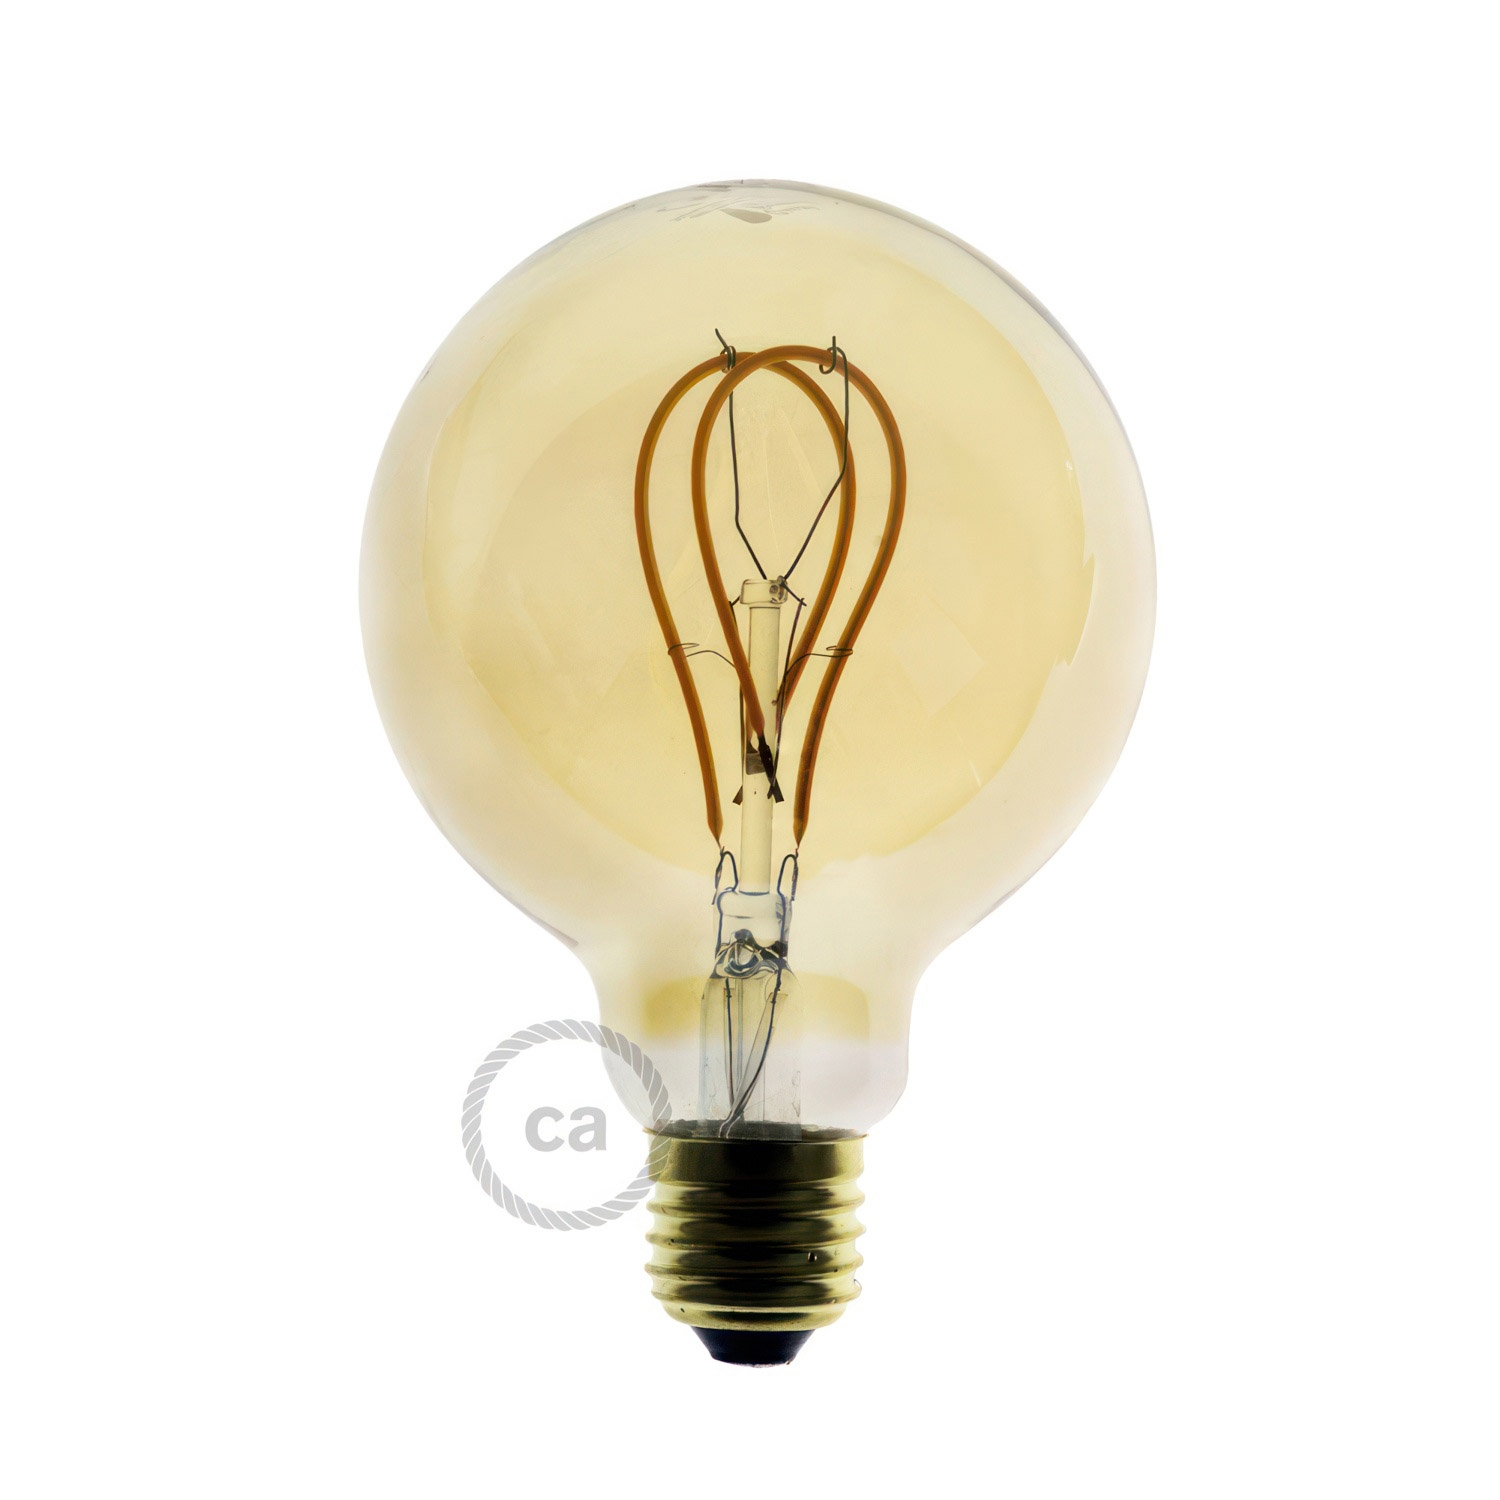 LED Golden Light Bulb - Globe G95 Curved Double Loop Filament - 5W E27 Dimmable 2000K